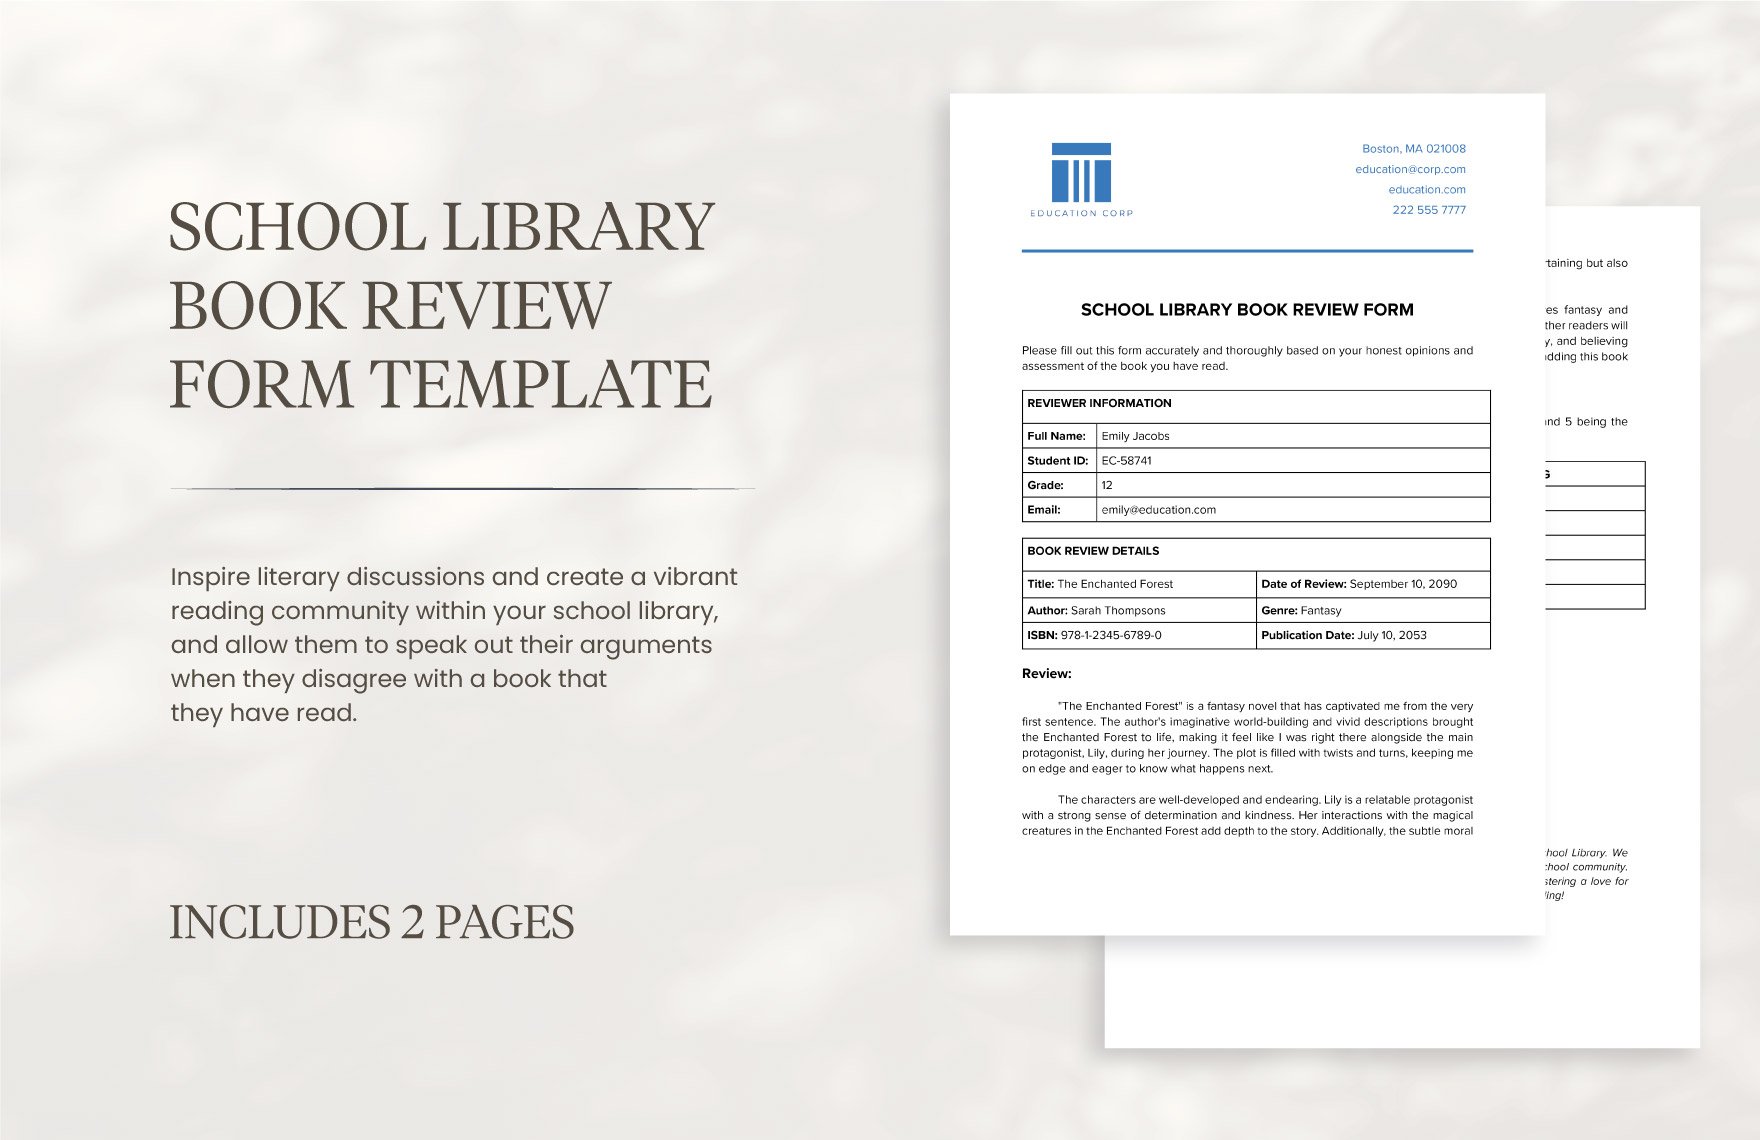 School Library Book Review Form Template